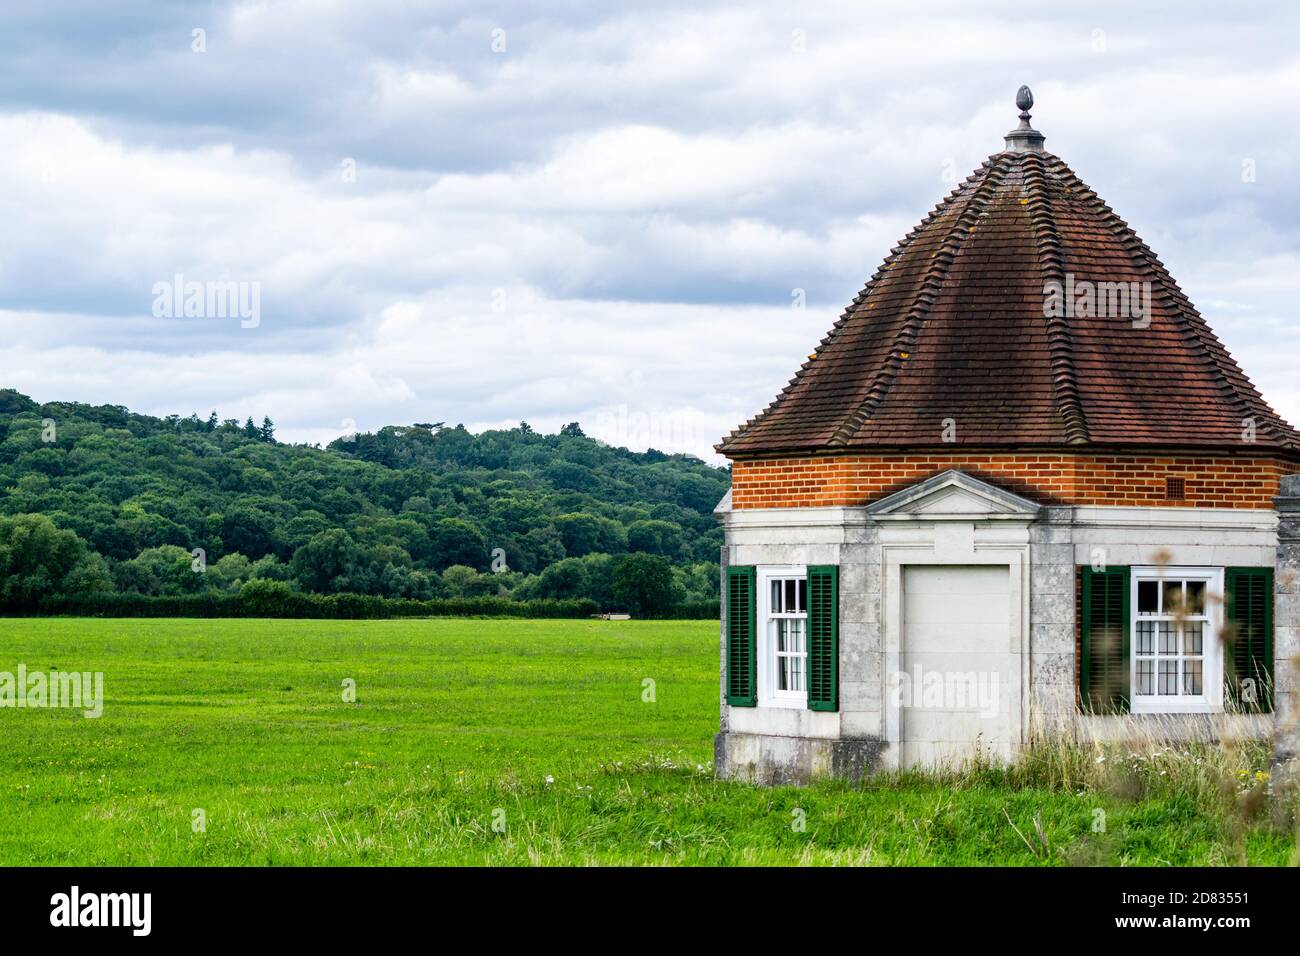 Windsor, United Kingdom - 28 July 2020: One of the Pair of Lutyens Kiosks on the Runnymede meadow, historic building commissioned by Lady Fairhaven Stock Photo